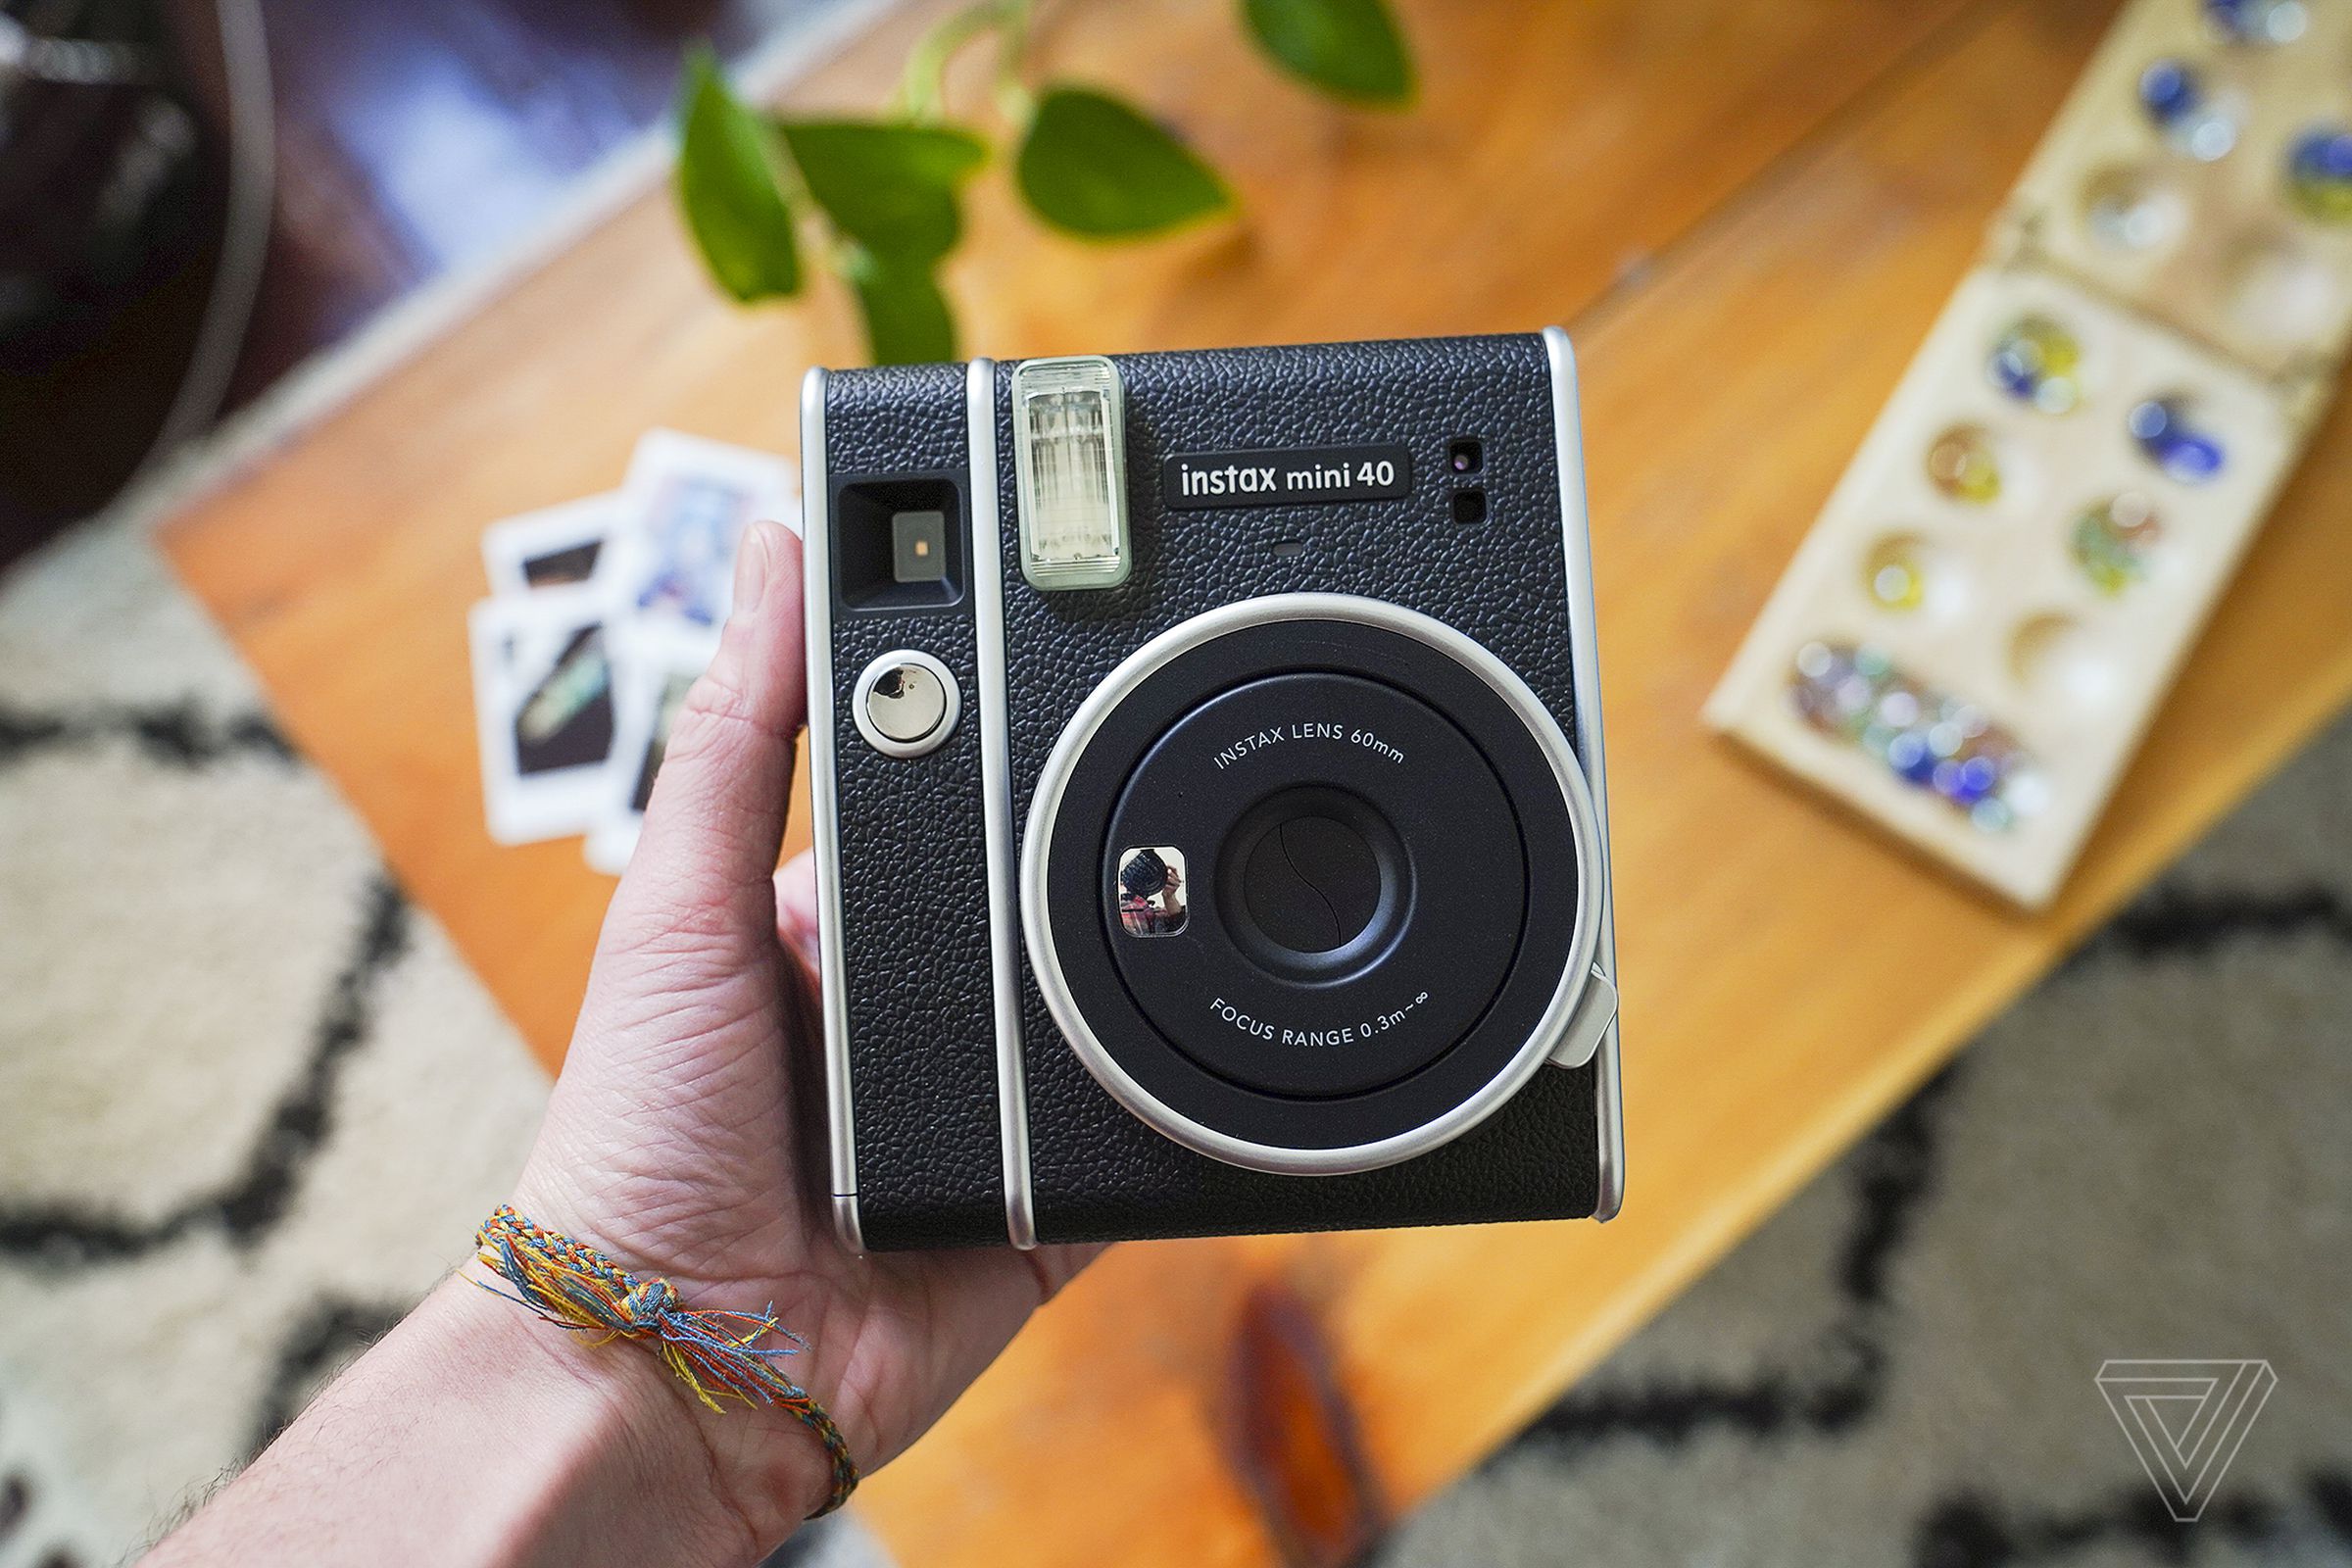 The Instax Mini 40 is an entry-level instant film camera with only two settings and two buttons.